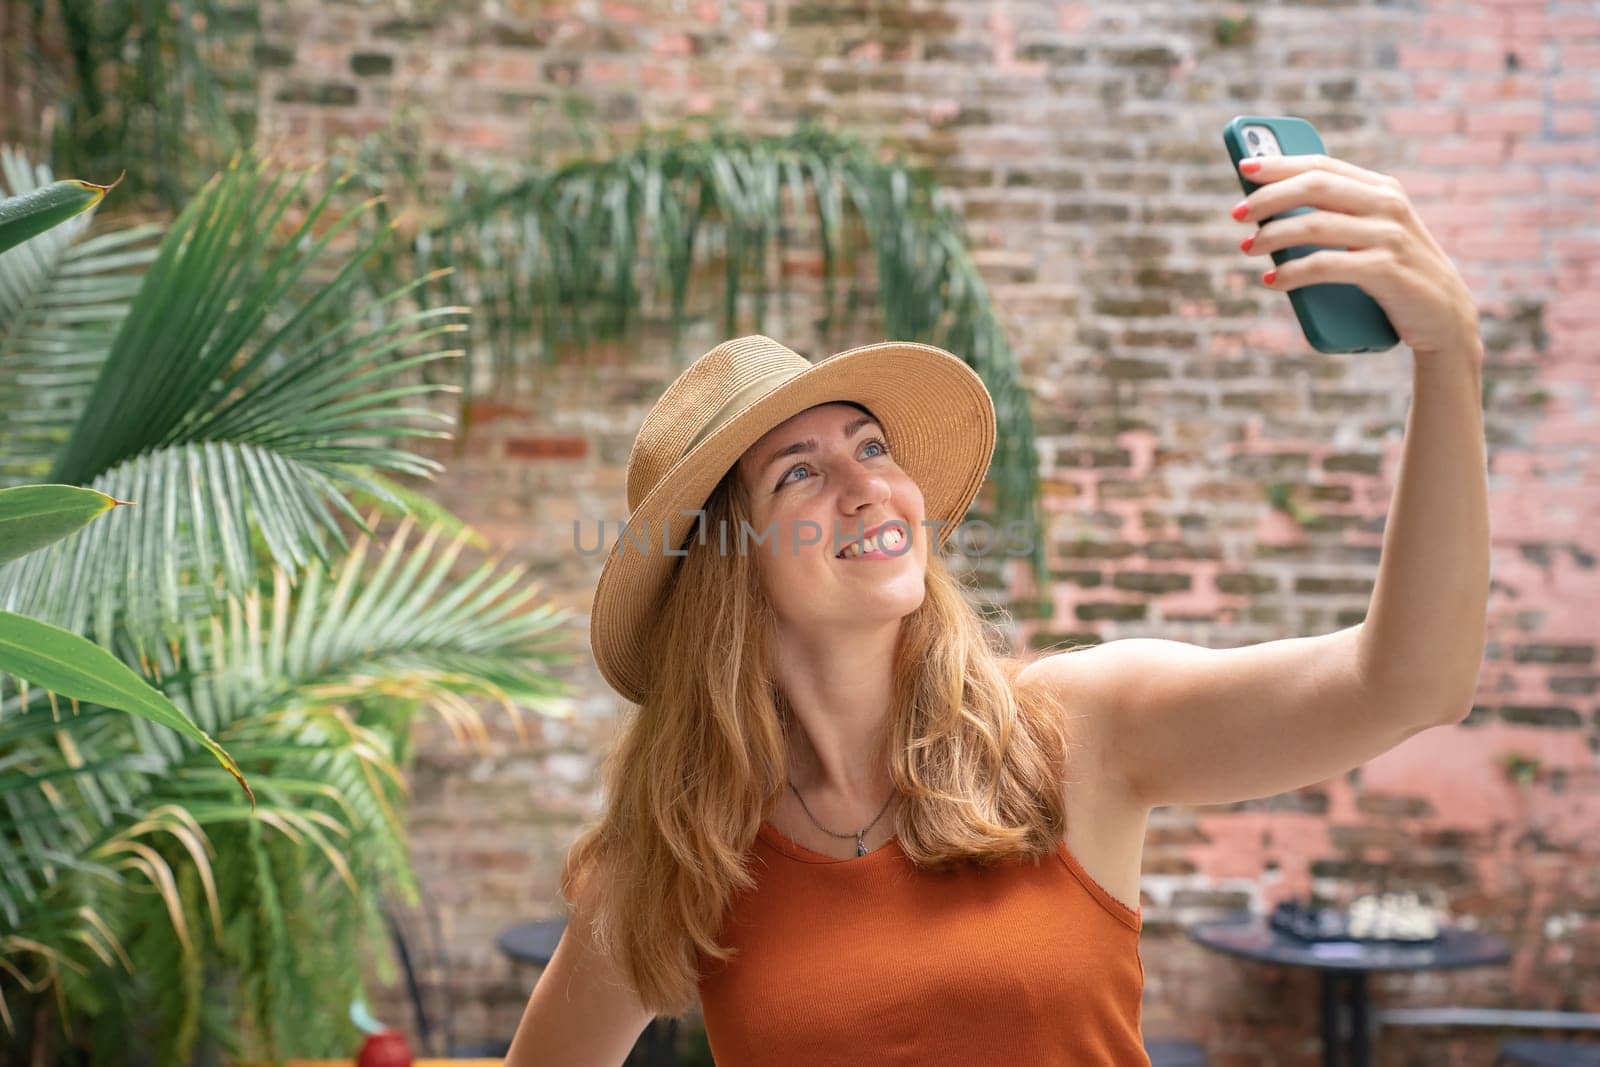 Woman wearing a sun hat is smiling and gesturing while taking a selfie with her cell phone in a leisurely travel landscape surrounded by terrestrial plants. She looks happy in the sunny weather